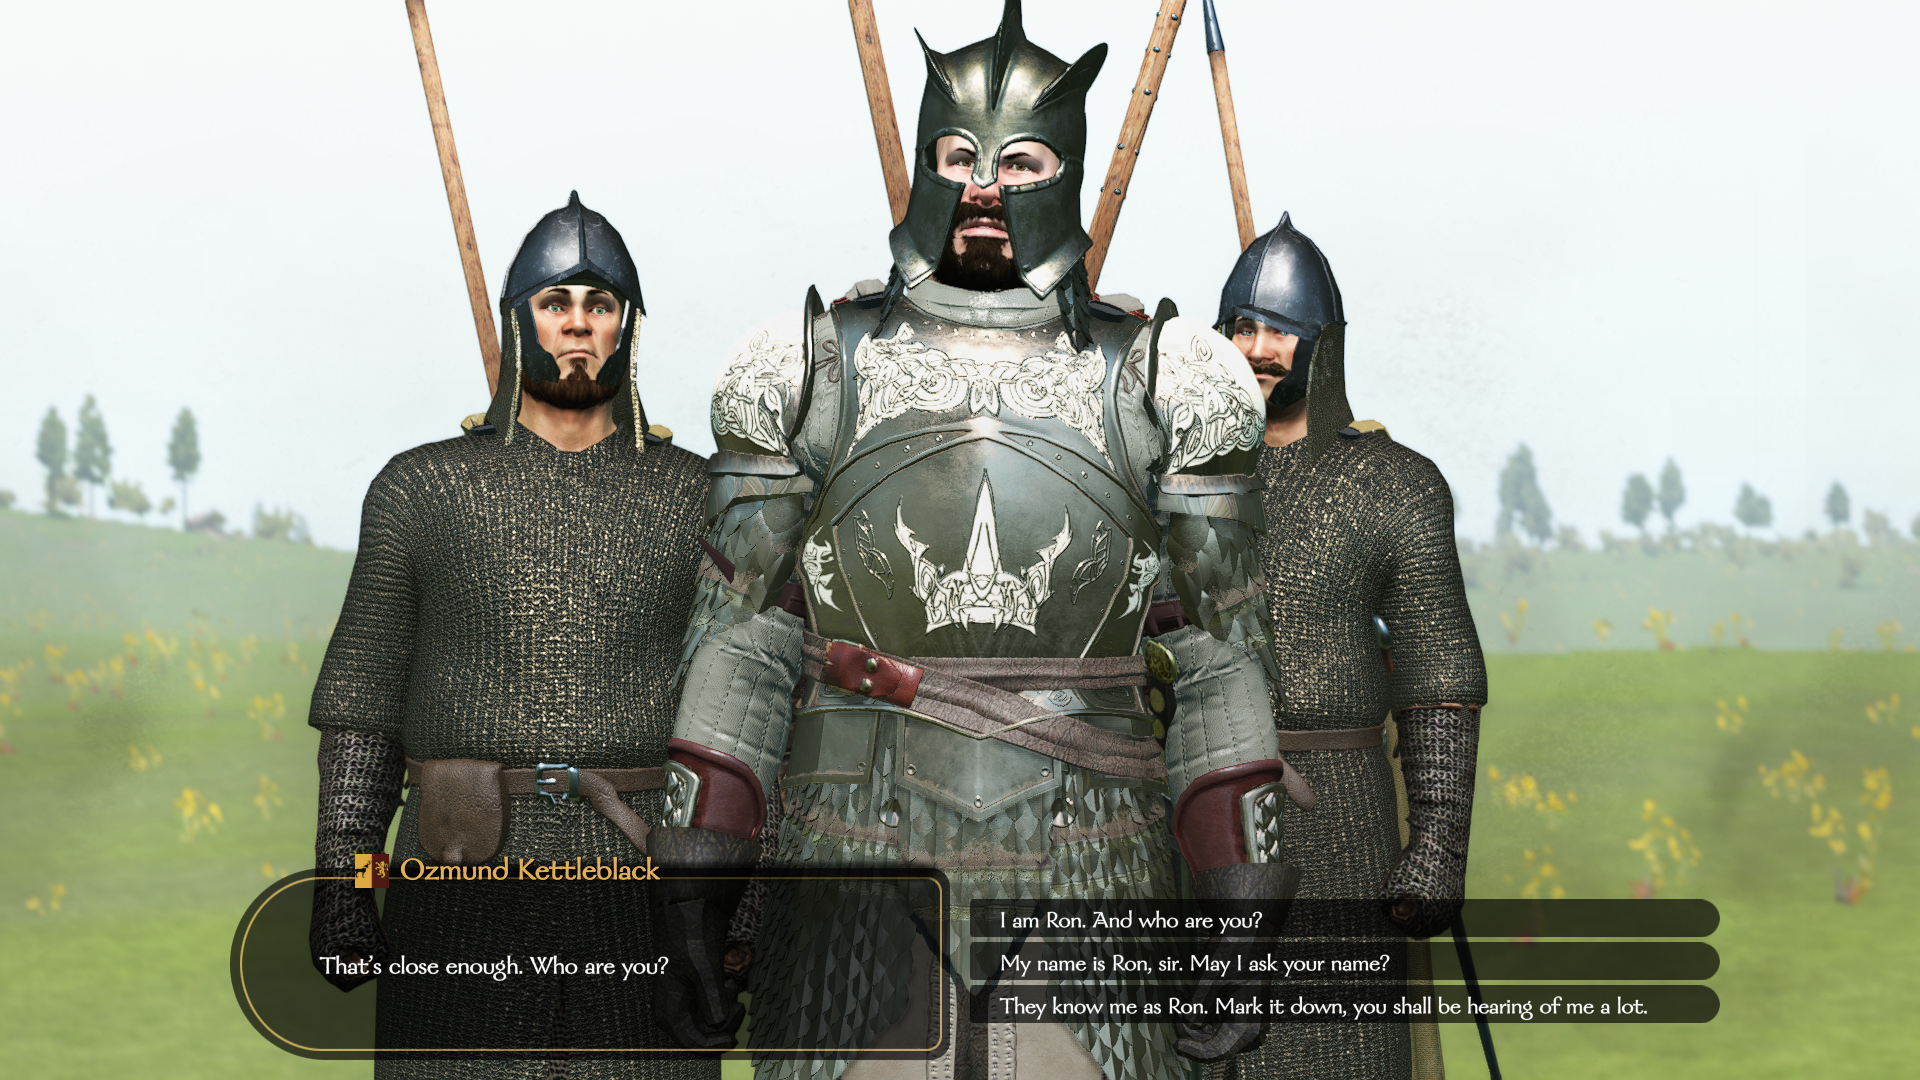 Mount blade 2 bannerlord мод игры престолов. Mount & Blade II: Bannerlord. Mount and Blade 2 Bannerlord Realm of Thrones. Mount and Blade 2 Bannerlord Рыцари.